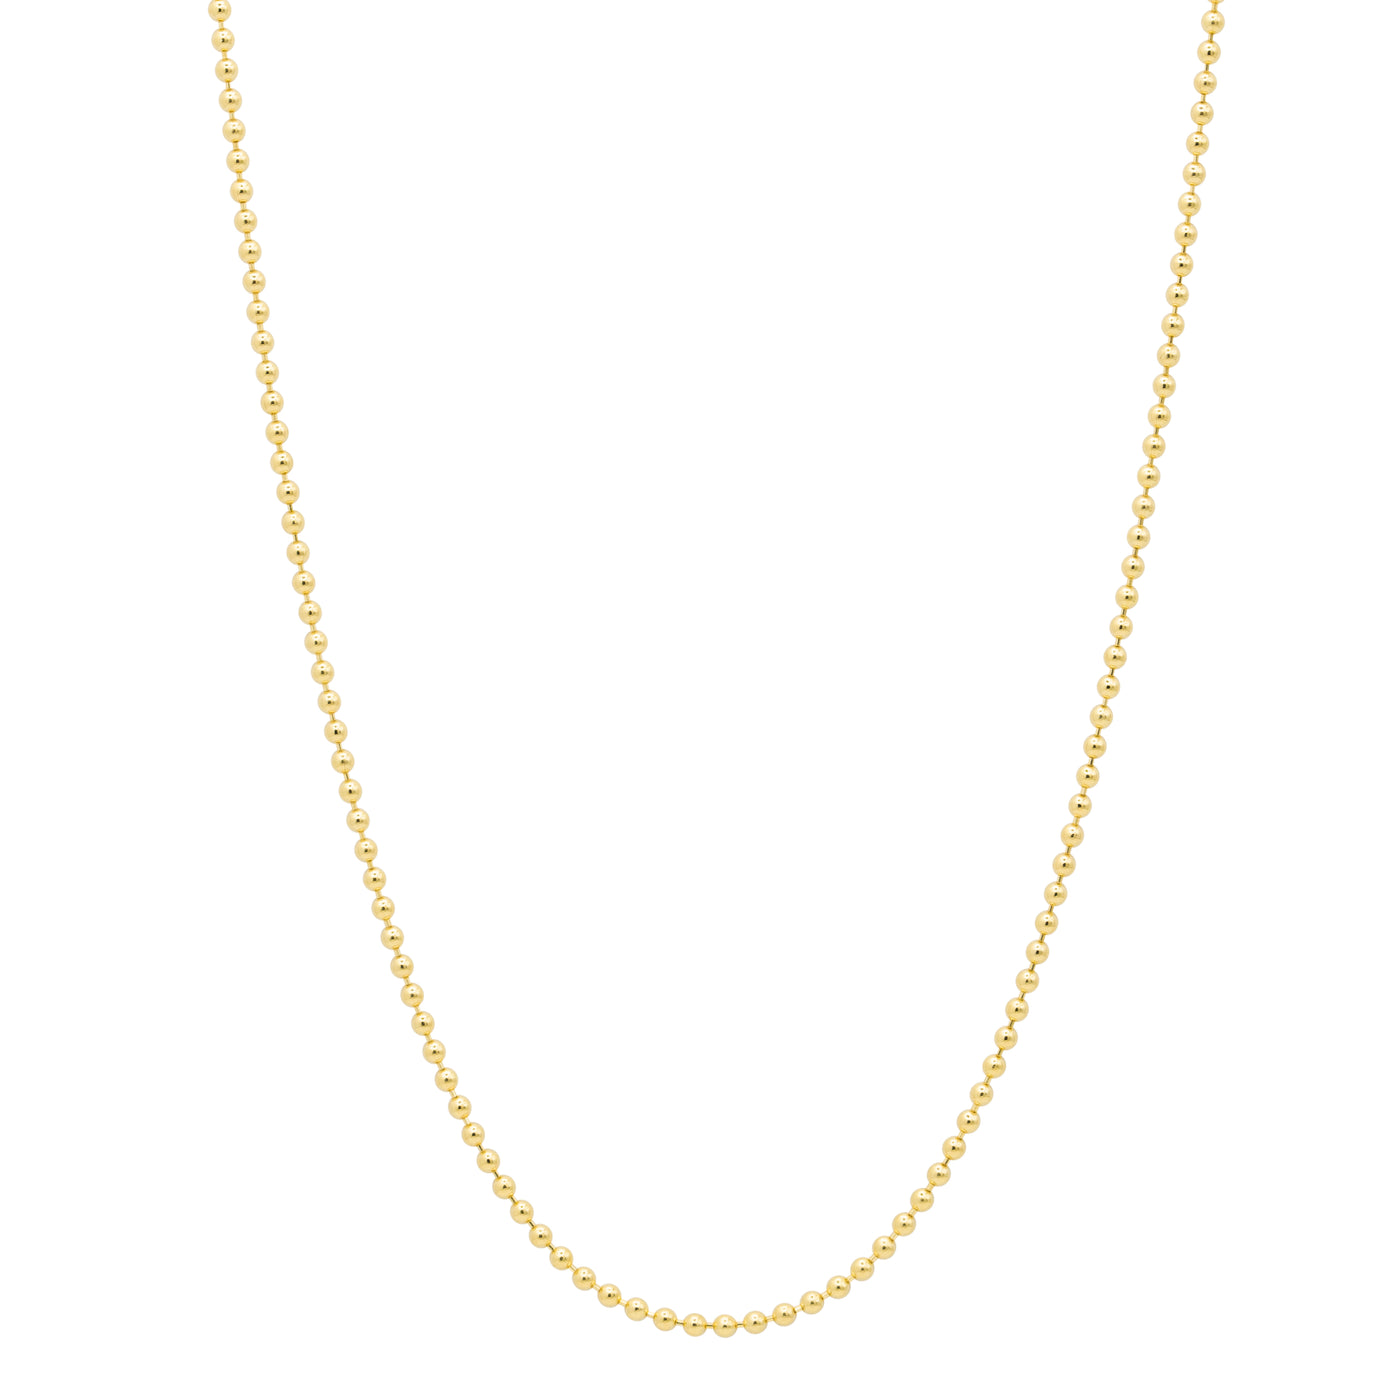 14K SOLID GOLD BALL CHAIN